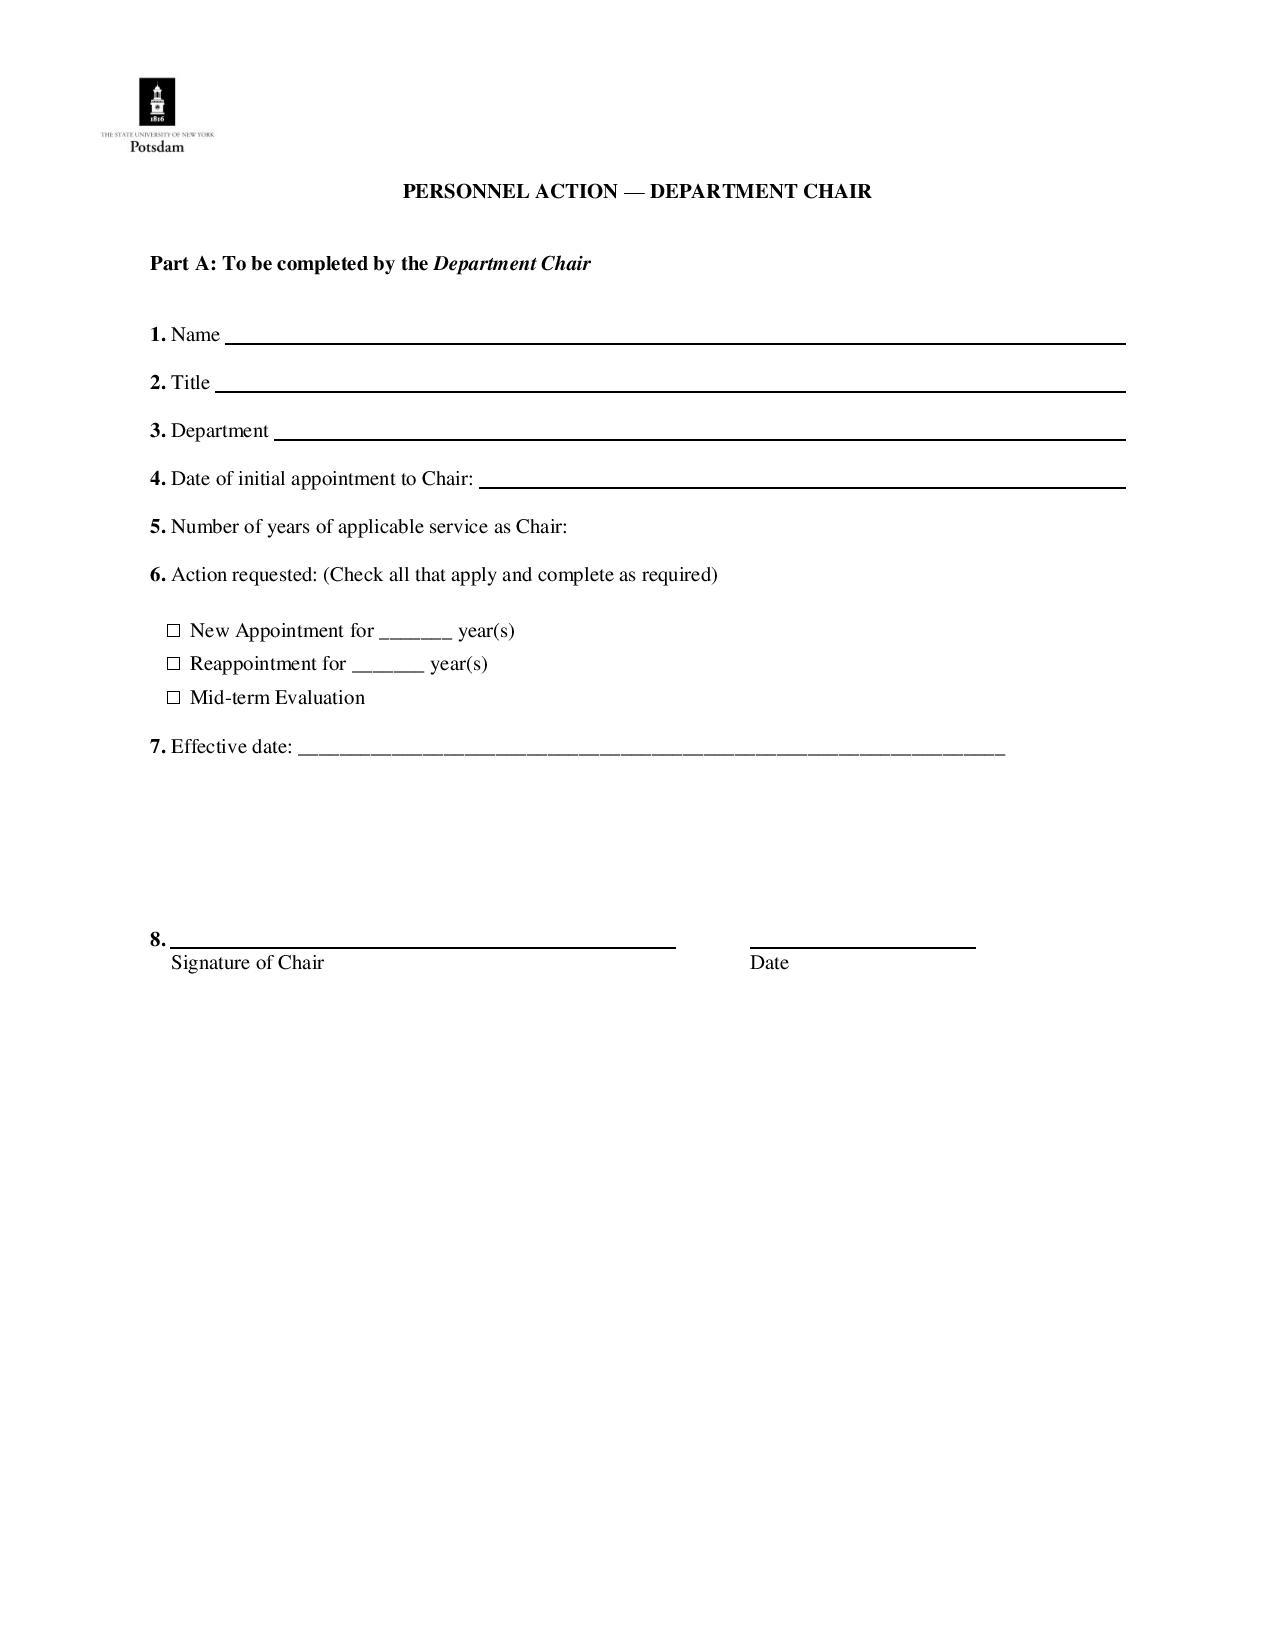 department chair personnel action form page 001